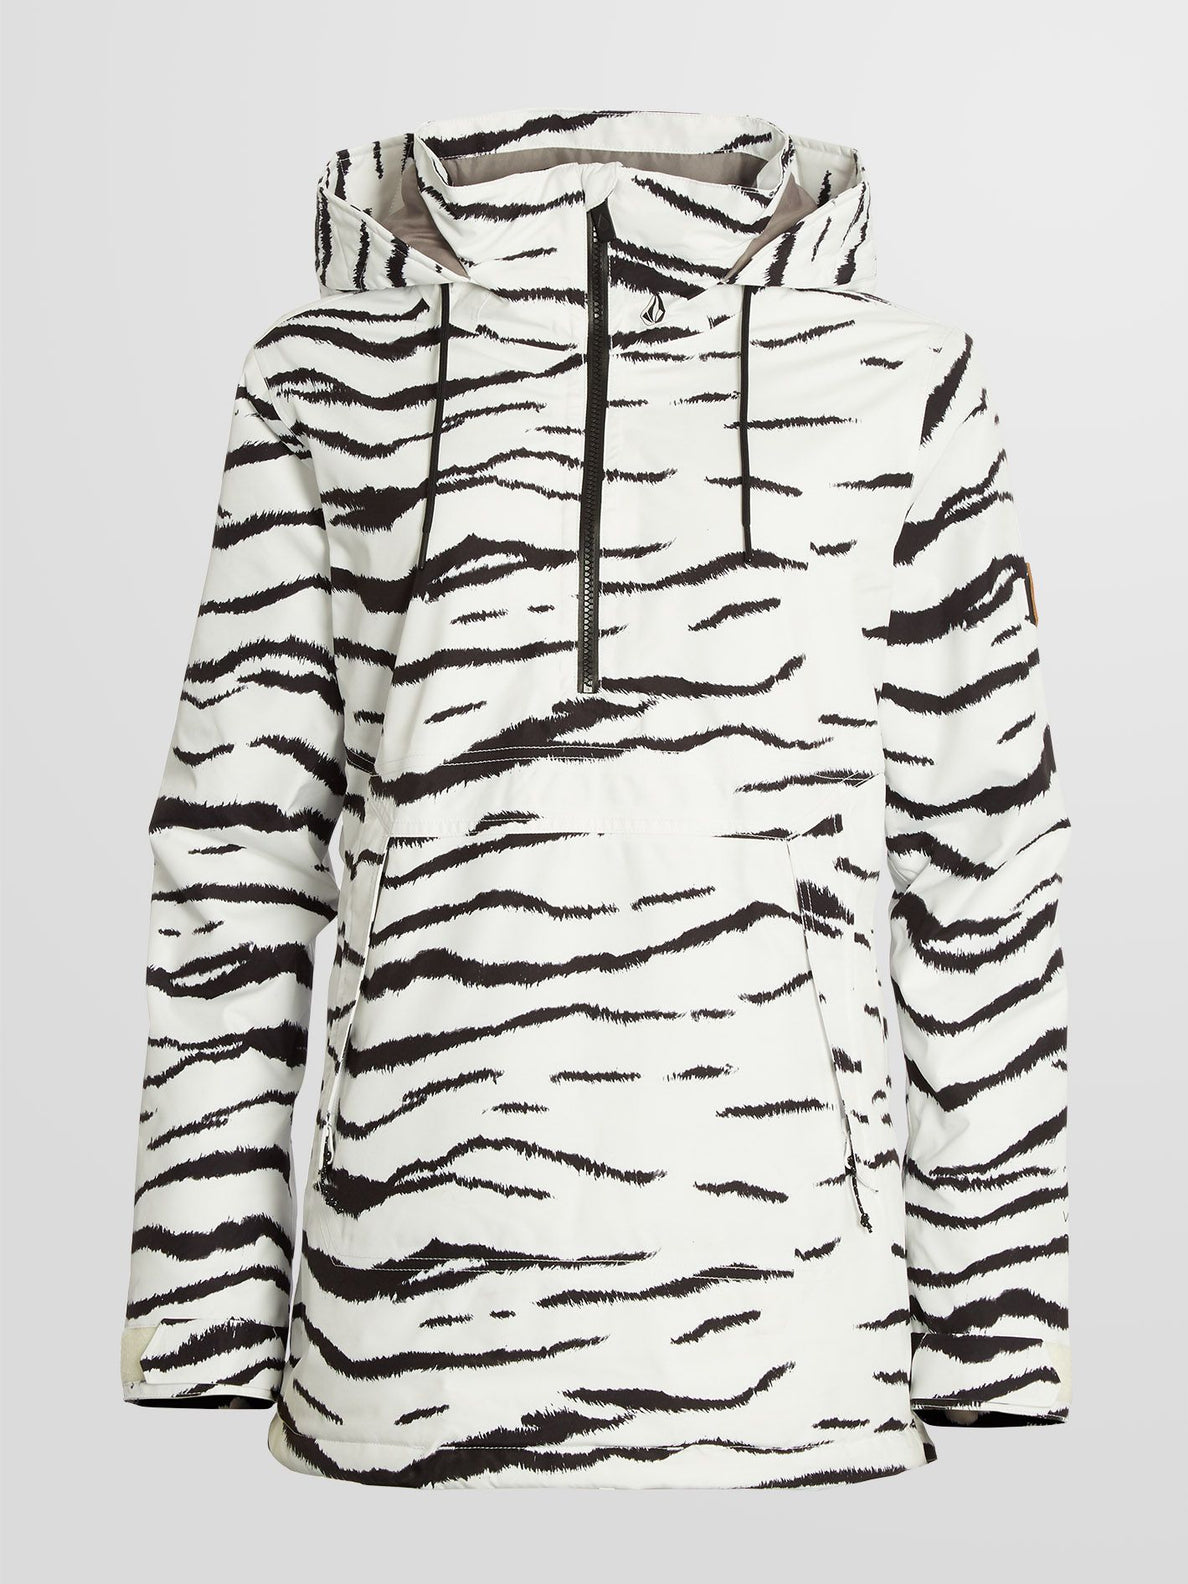 Fern Insulated GORE-TEX Pullover Jacket - White Tiger